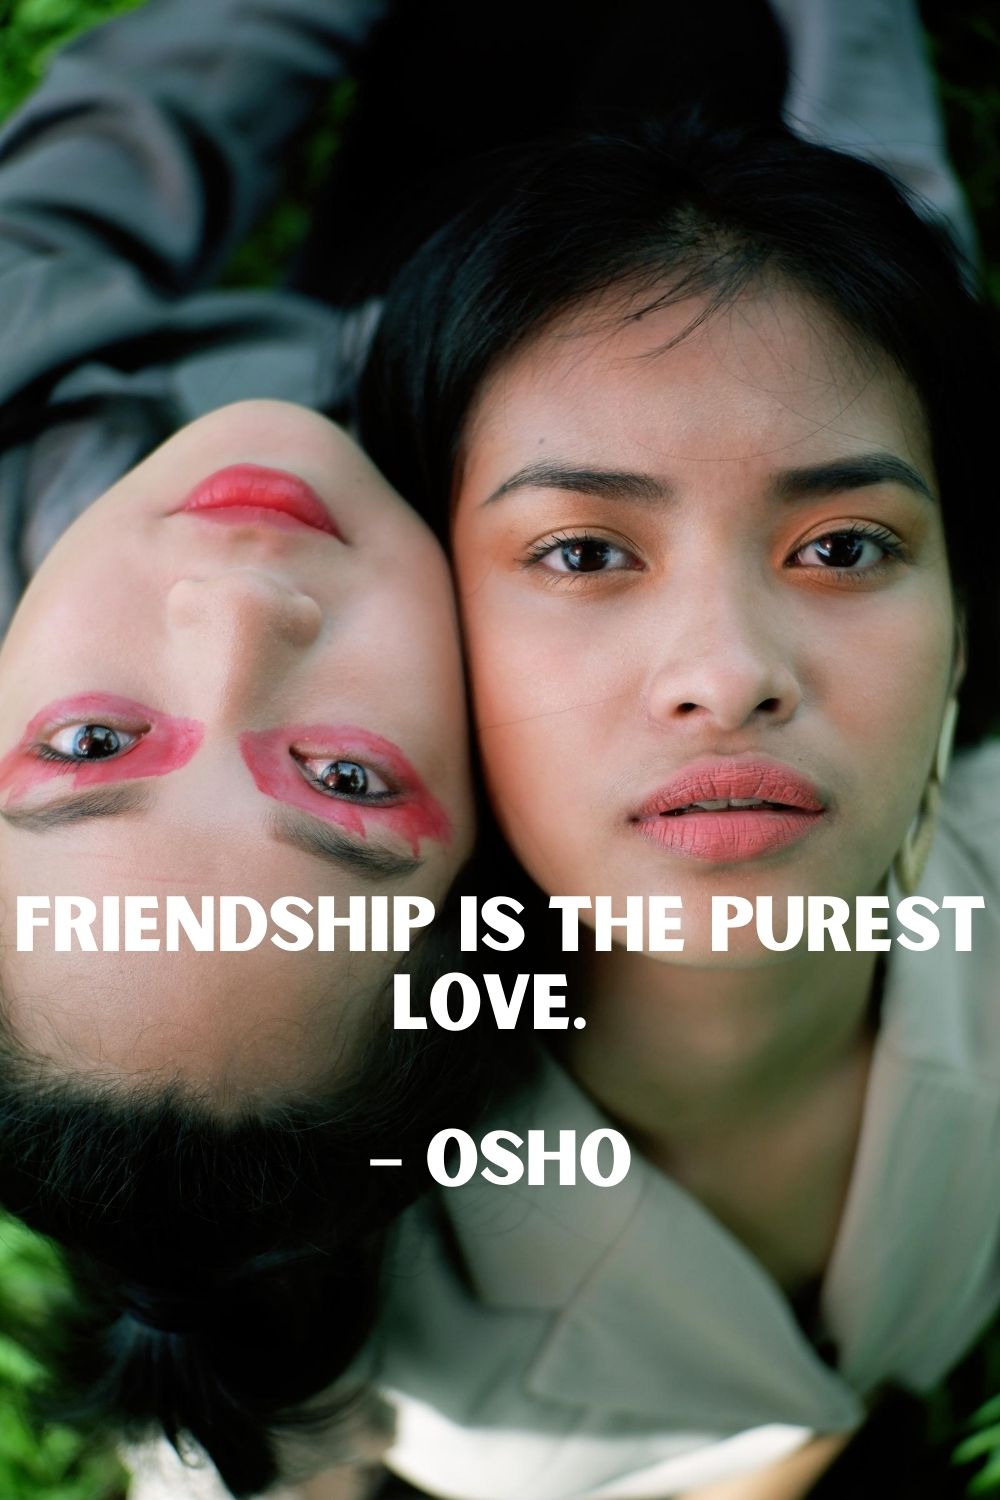 Friendship is the purest love. – Osho